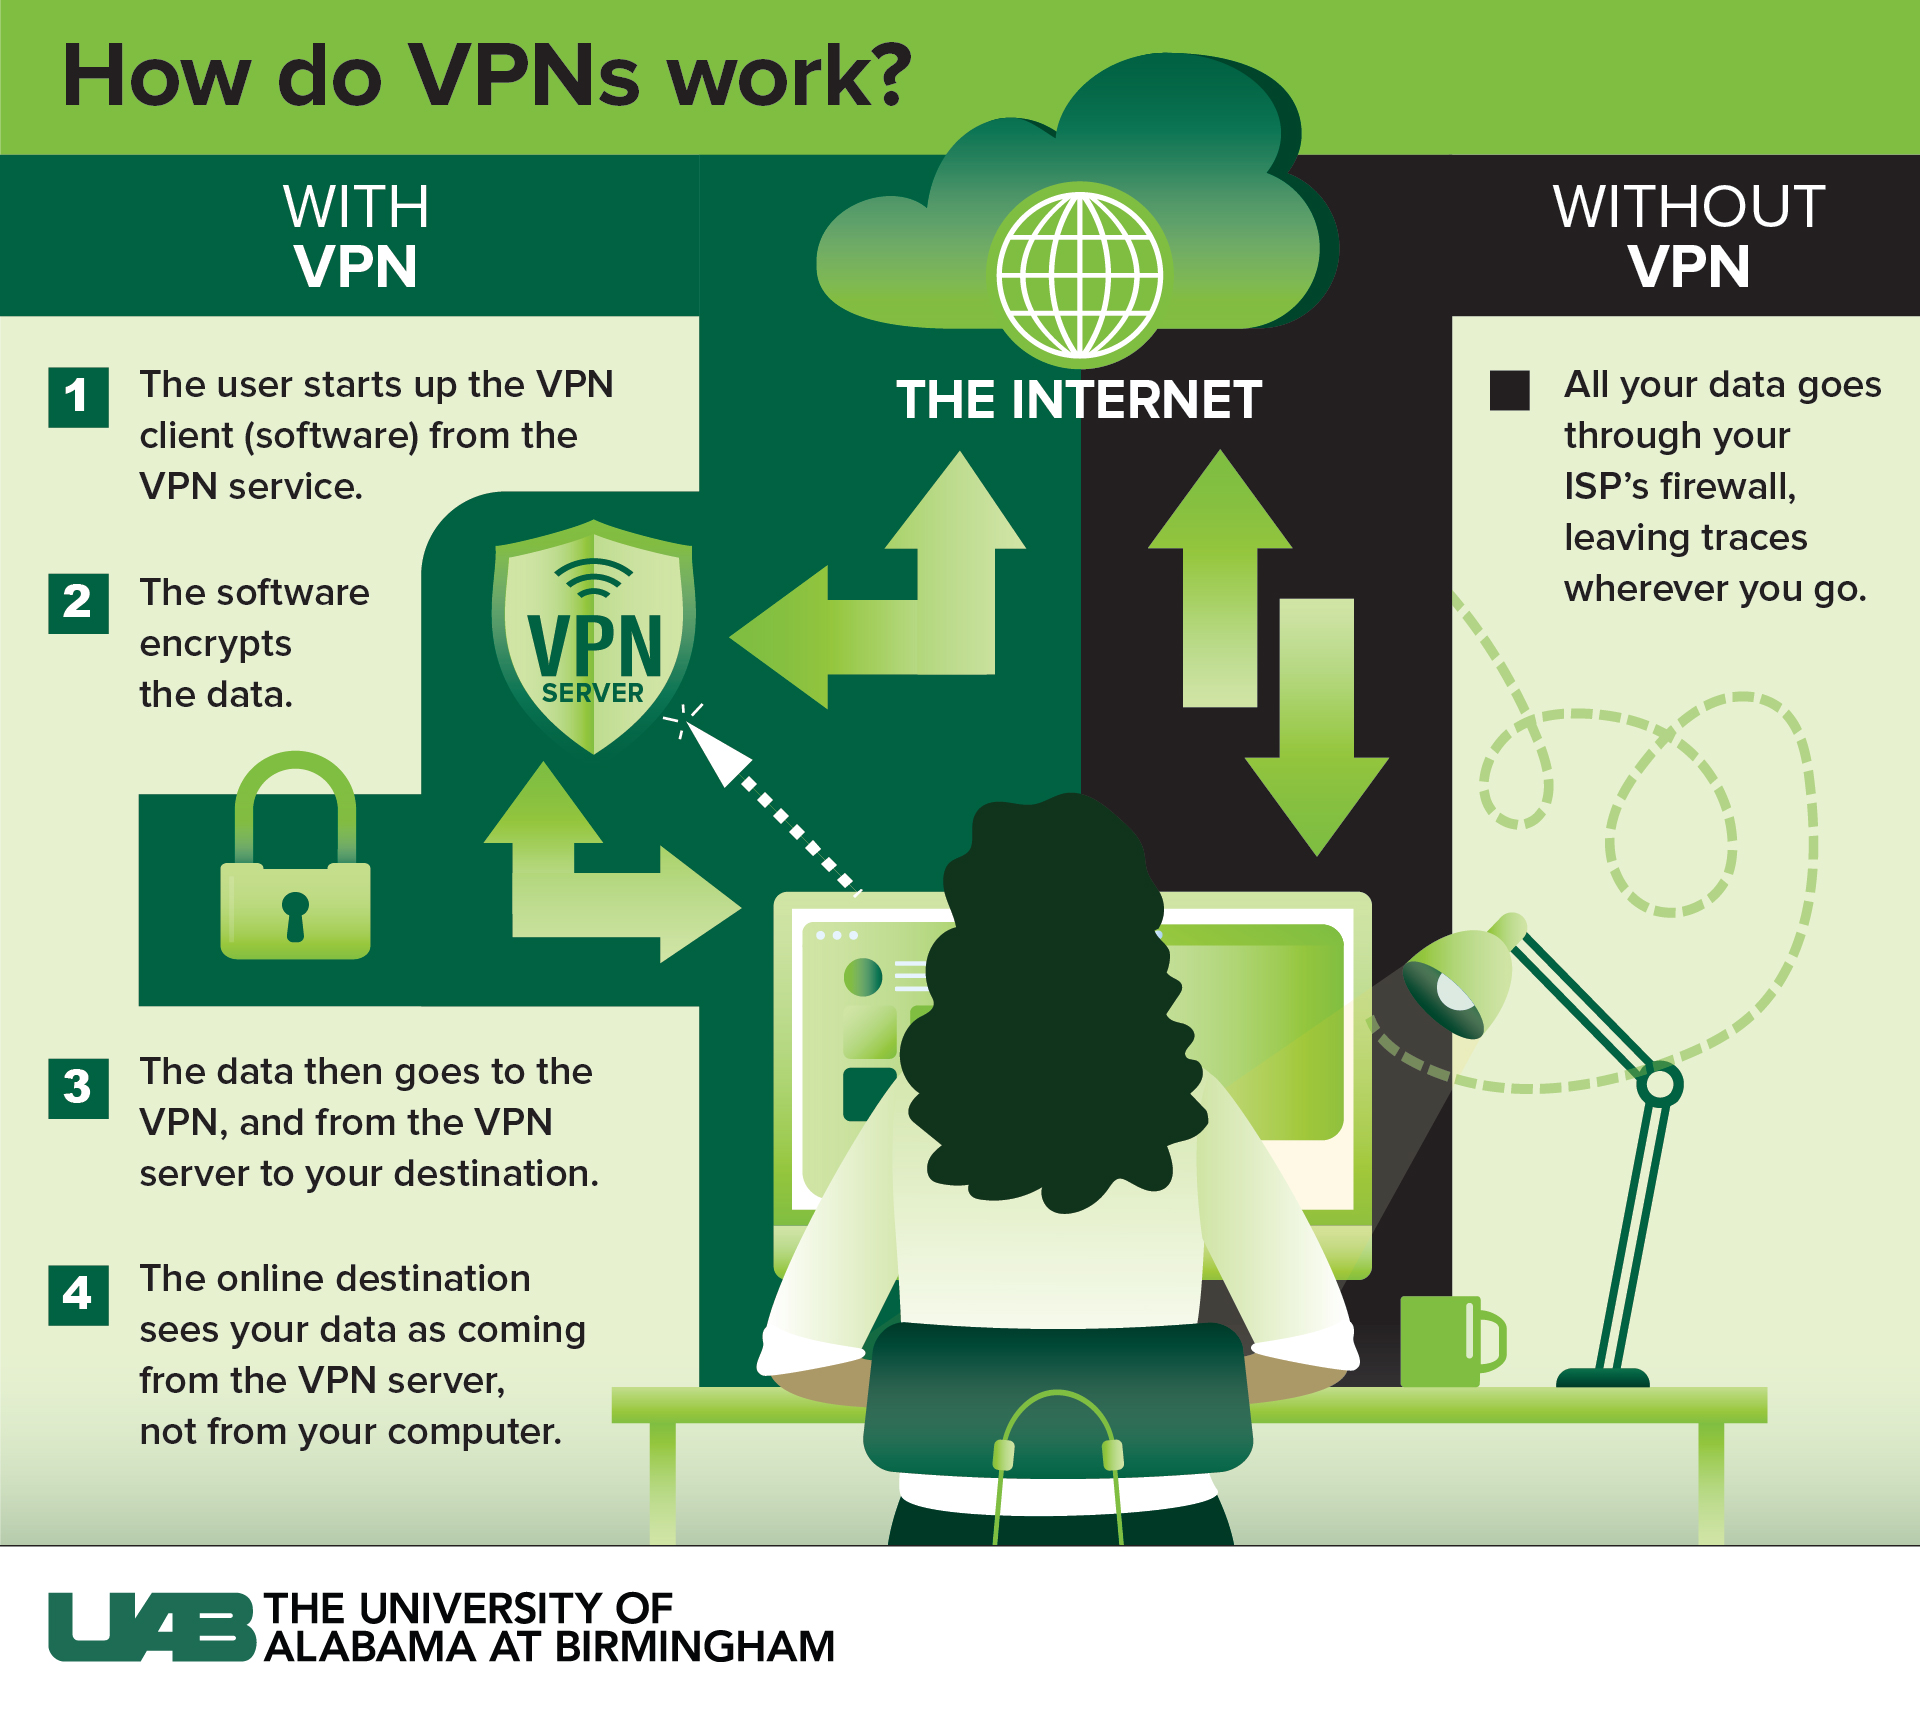 do i need vpn protection at home